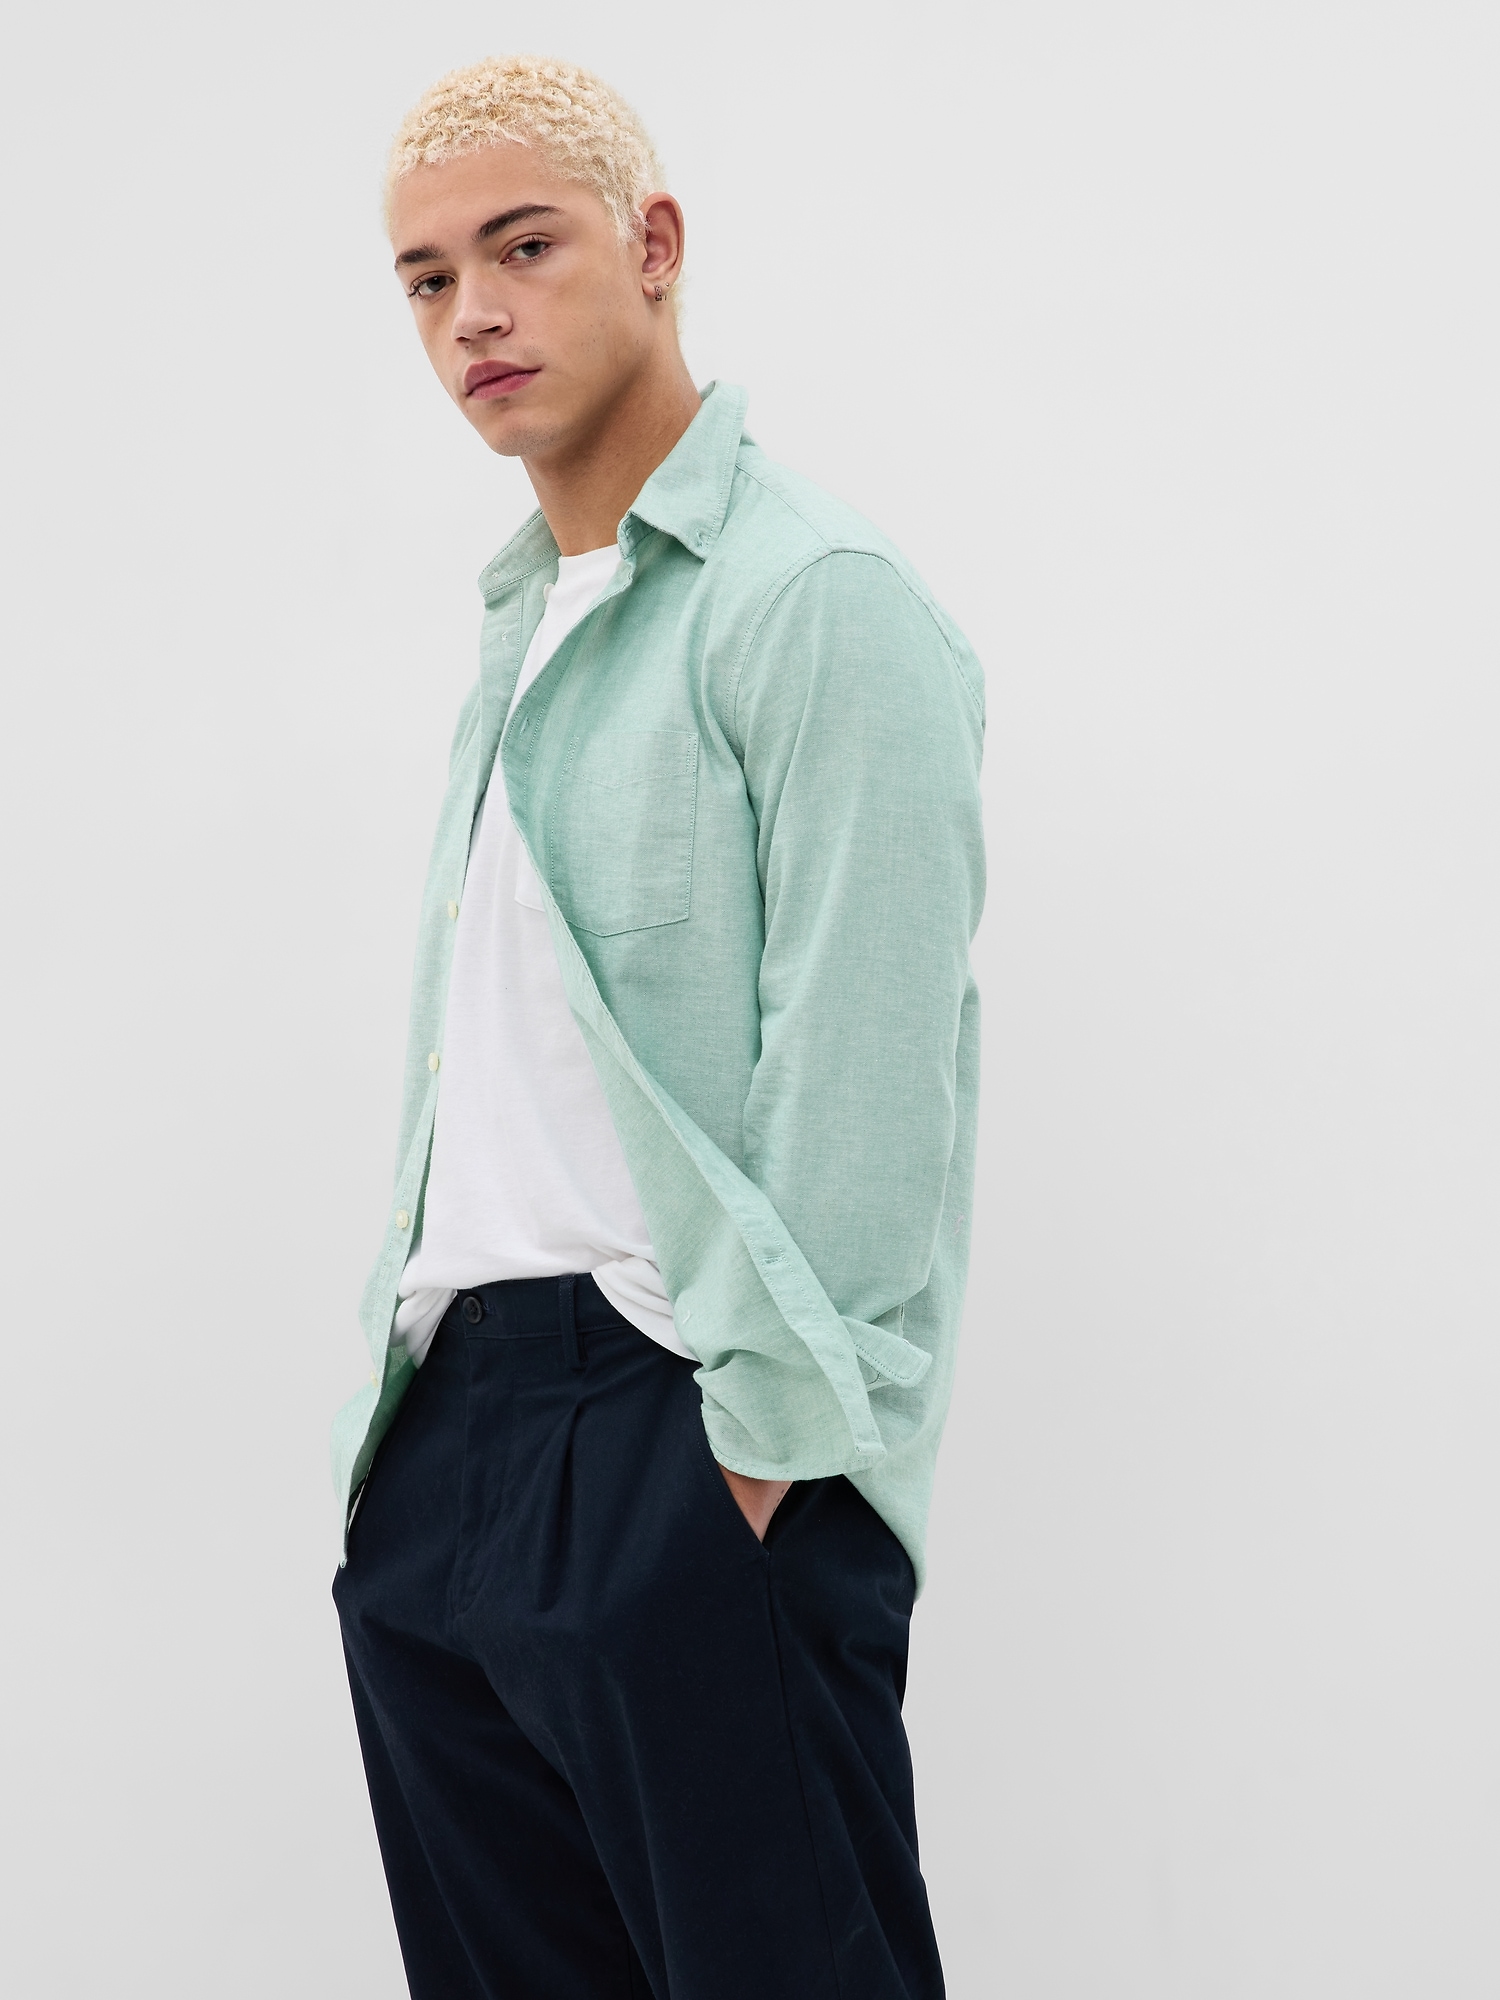 Classic Oxford Shirt in Standard Fit with In-Conversion Cotton